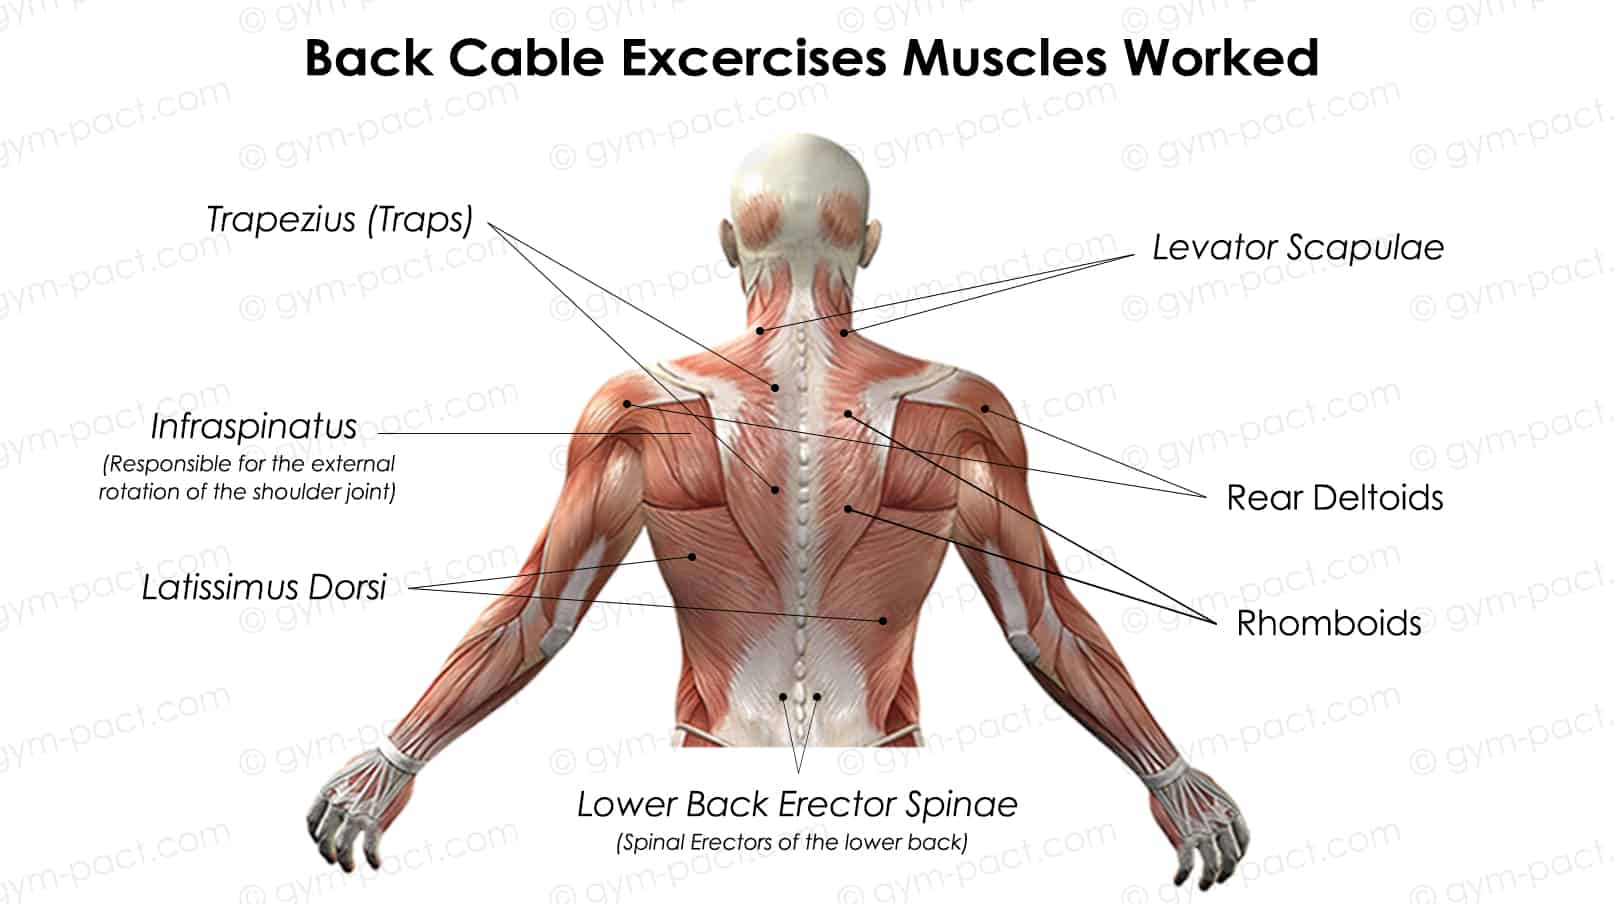 Cable Exercises for your Back muscles worked